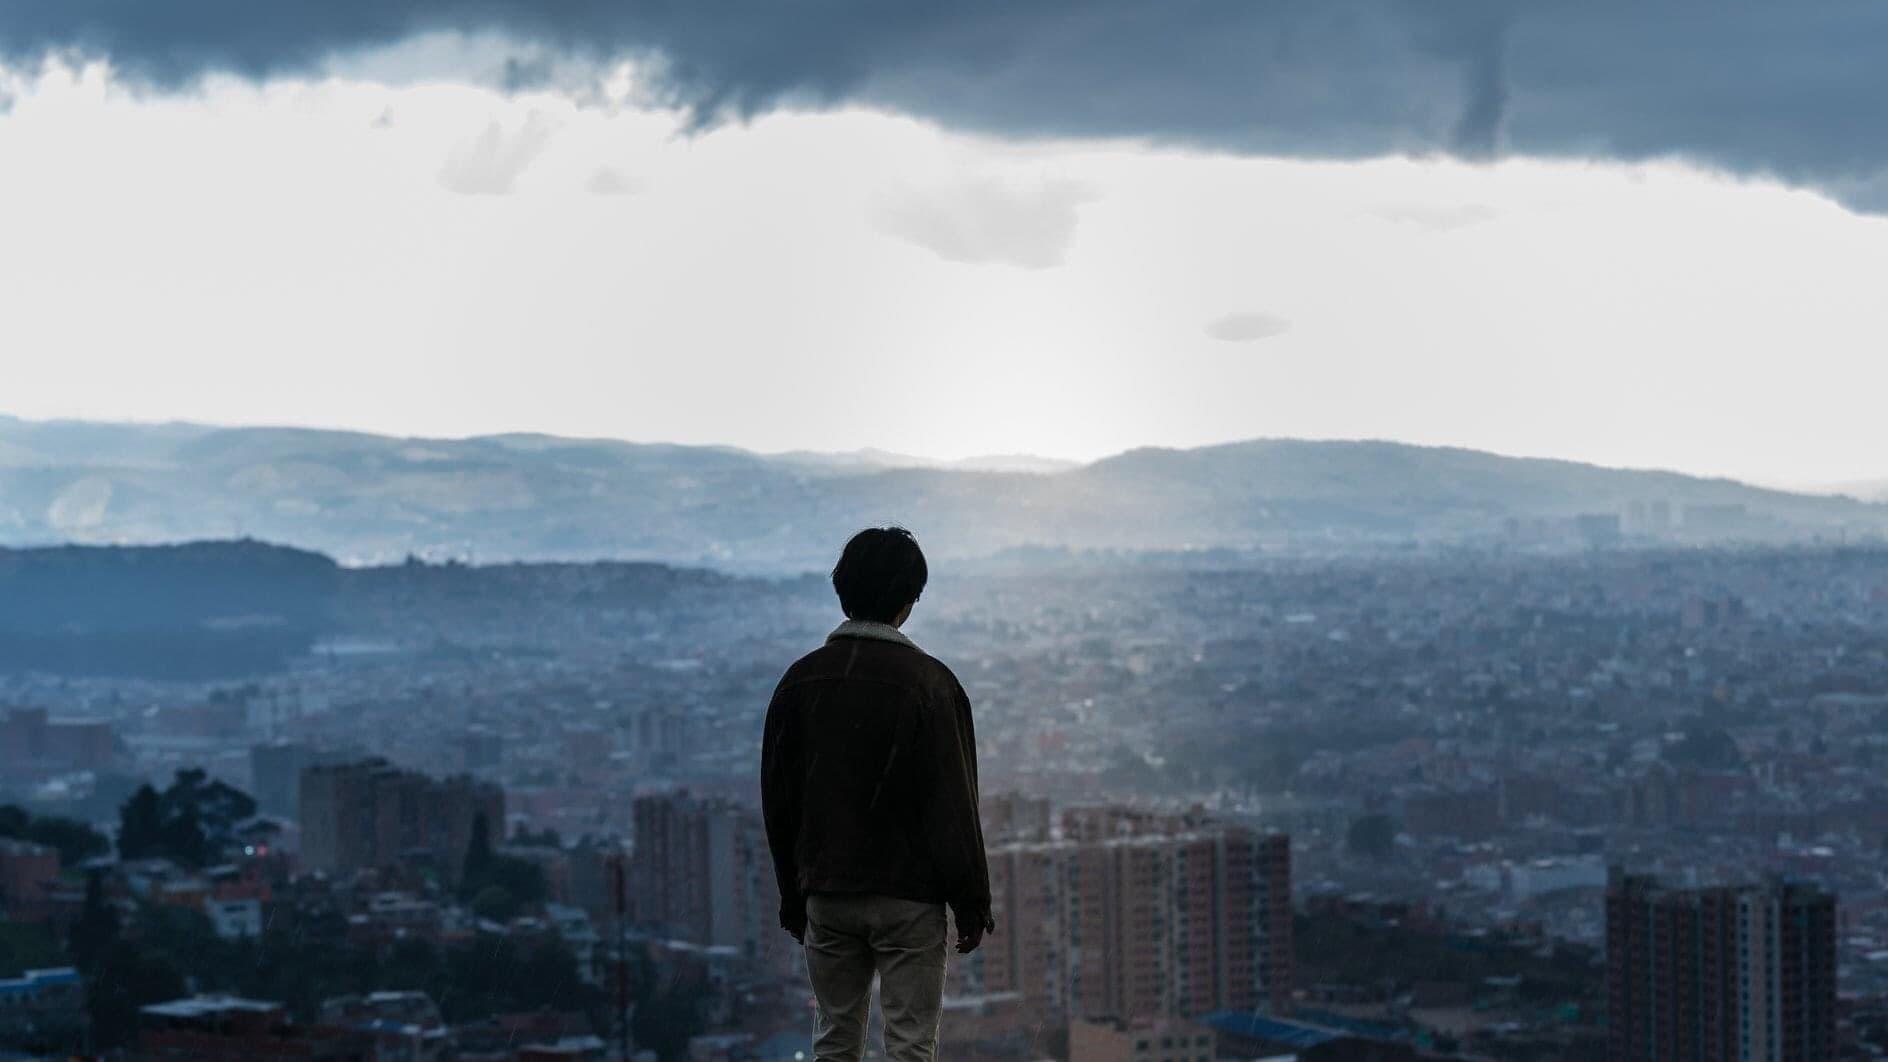 Bogota: City of the Lost backdrop